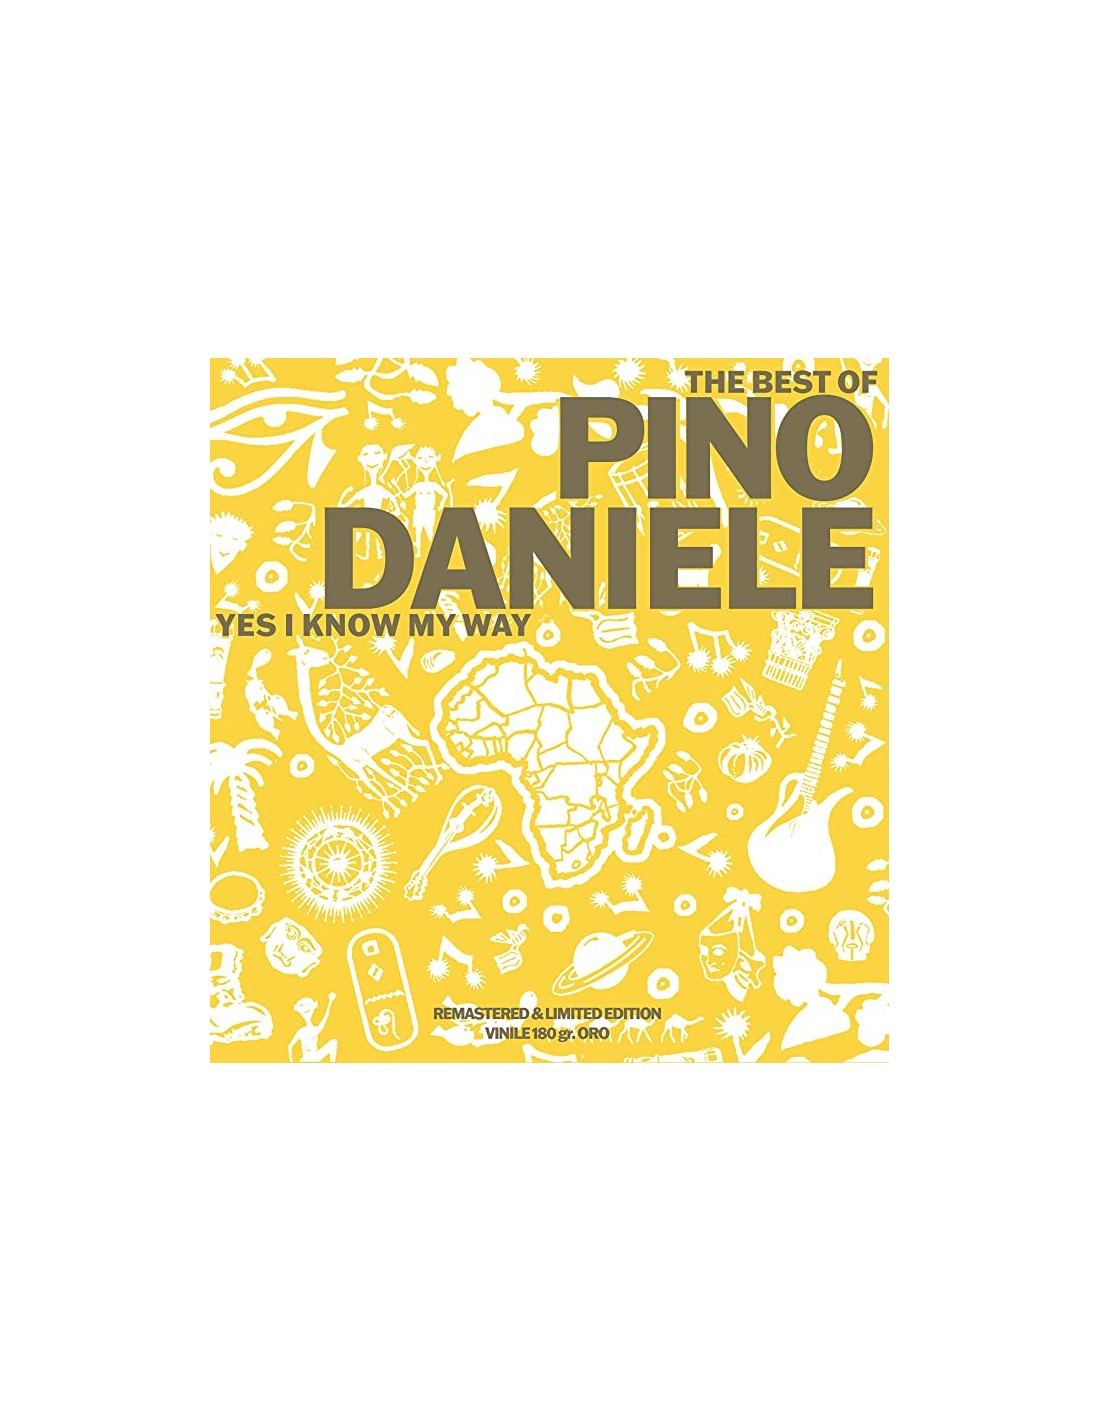 Pino Daniele The Best Of 2 LP Limited Edition VINILE